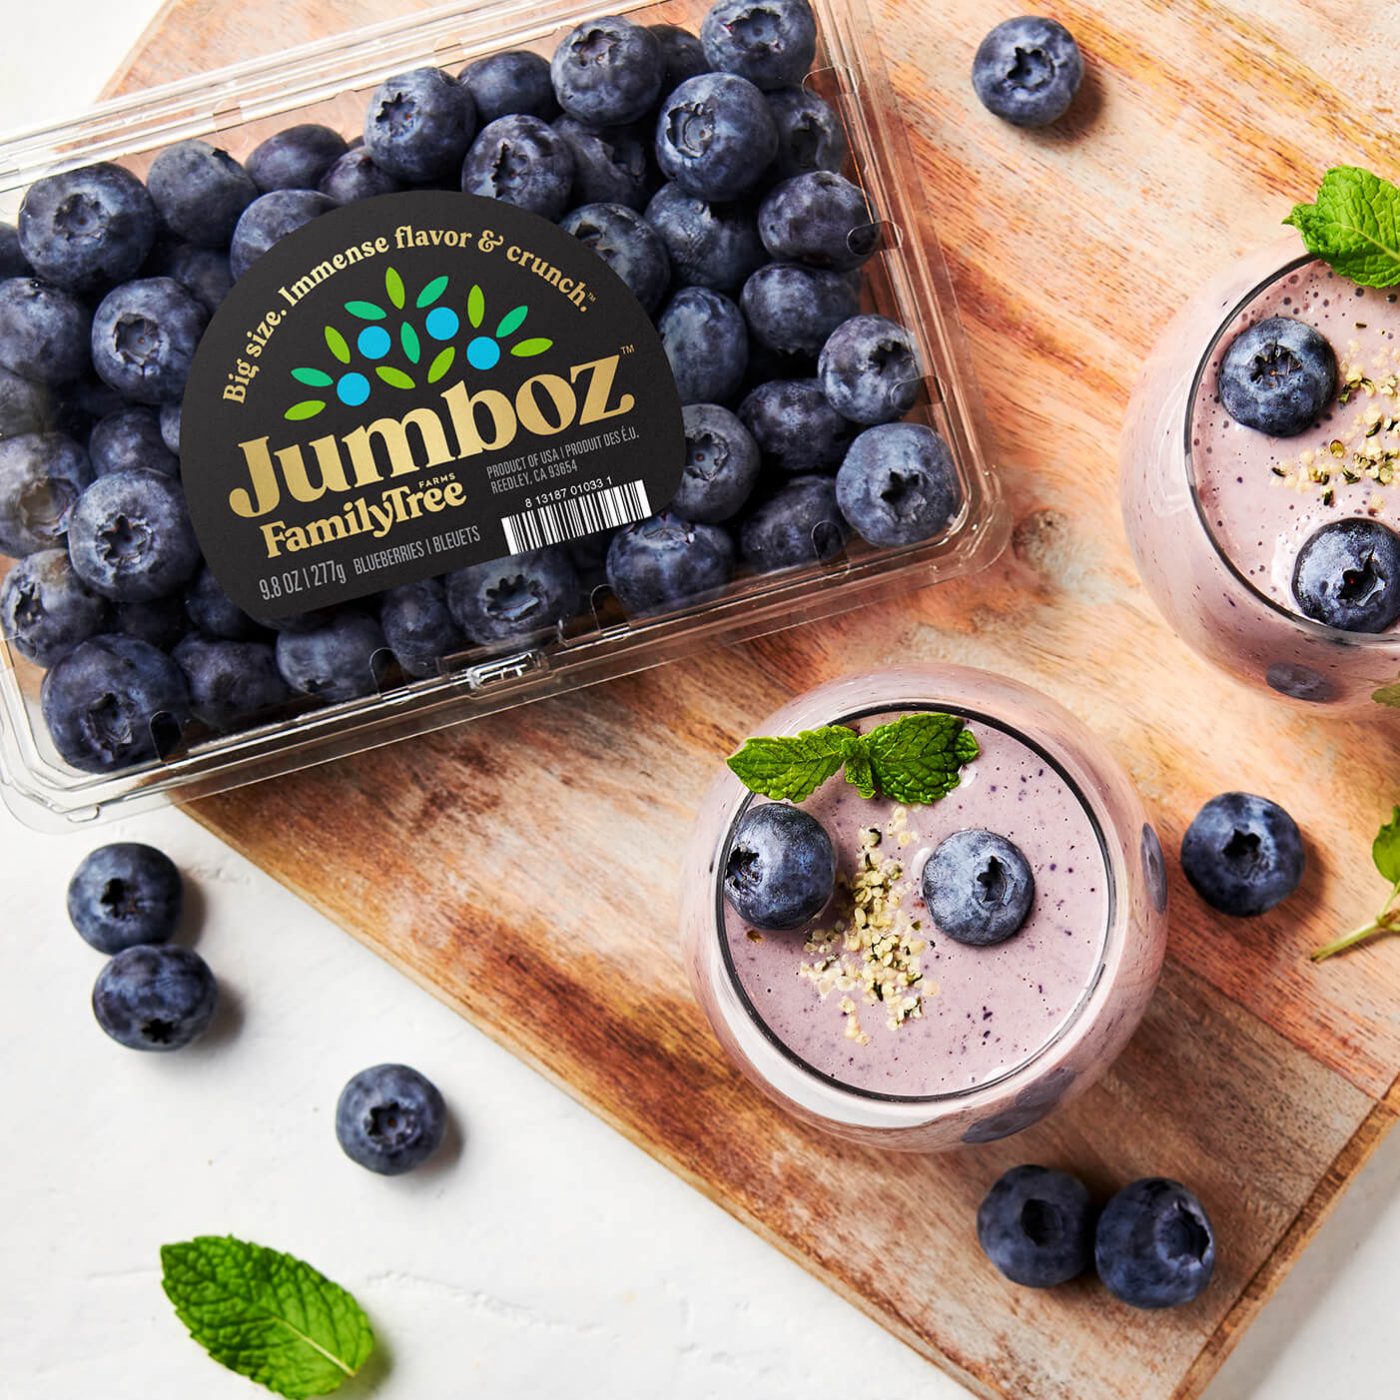 Image of blueberry packaging with smoothies